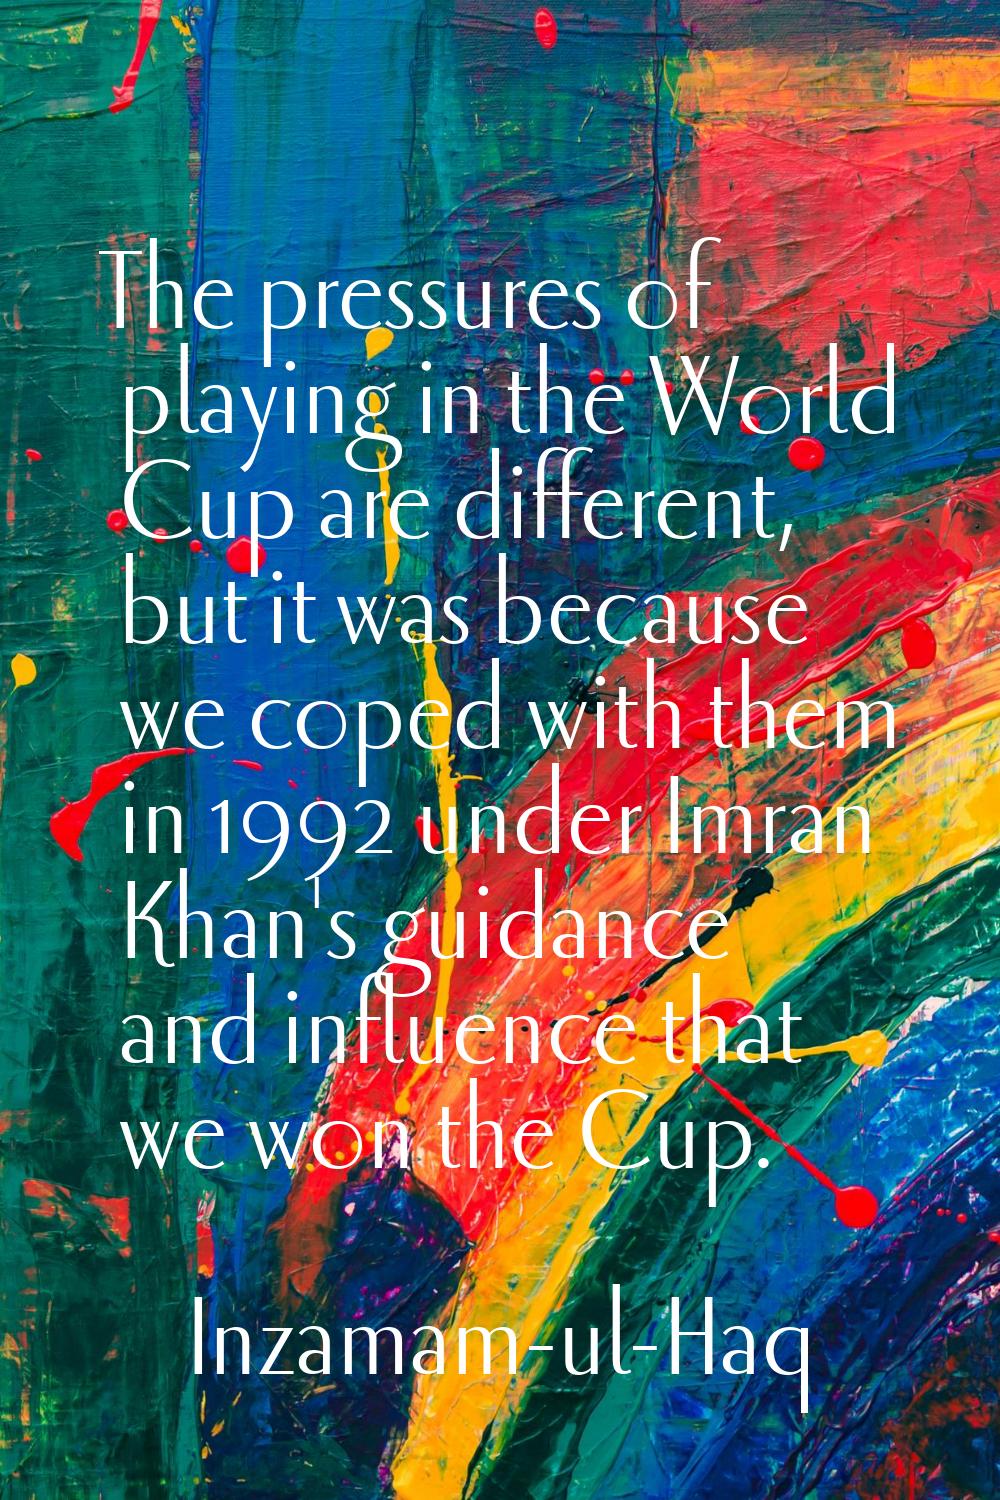 The pressures of playing in the World Cup are different, but it was because we coped with them in 1